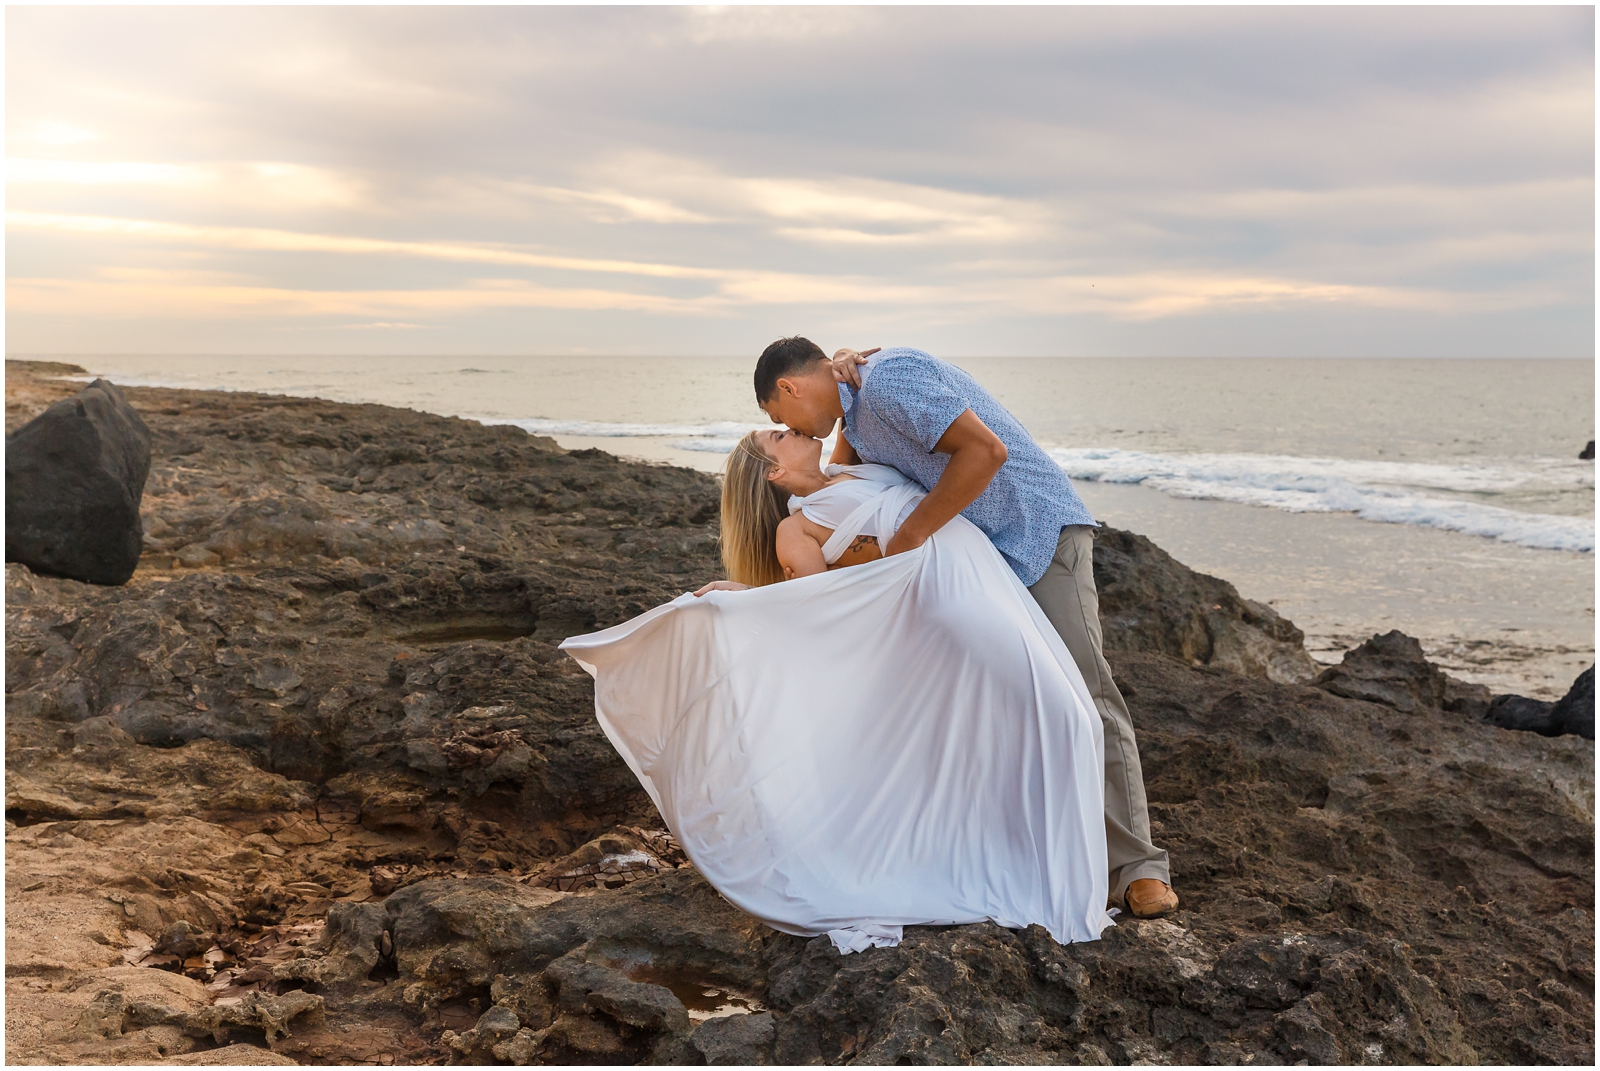 Sunset during this couple's Oahu simple wedding.